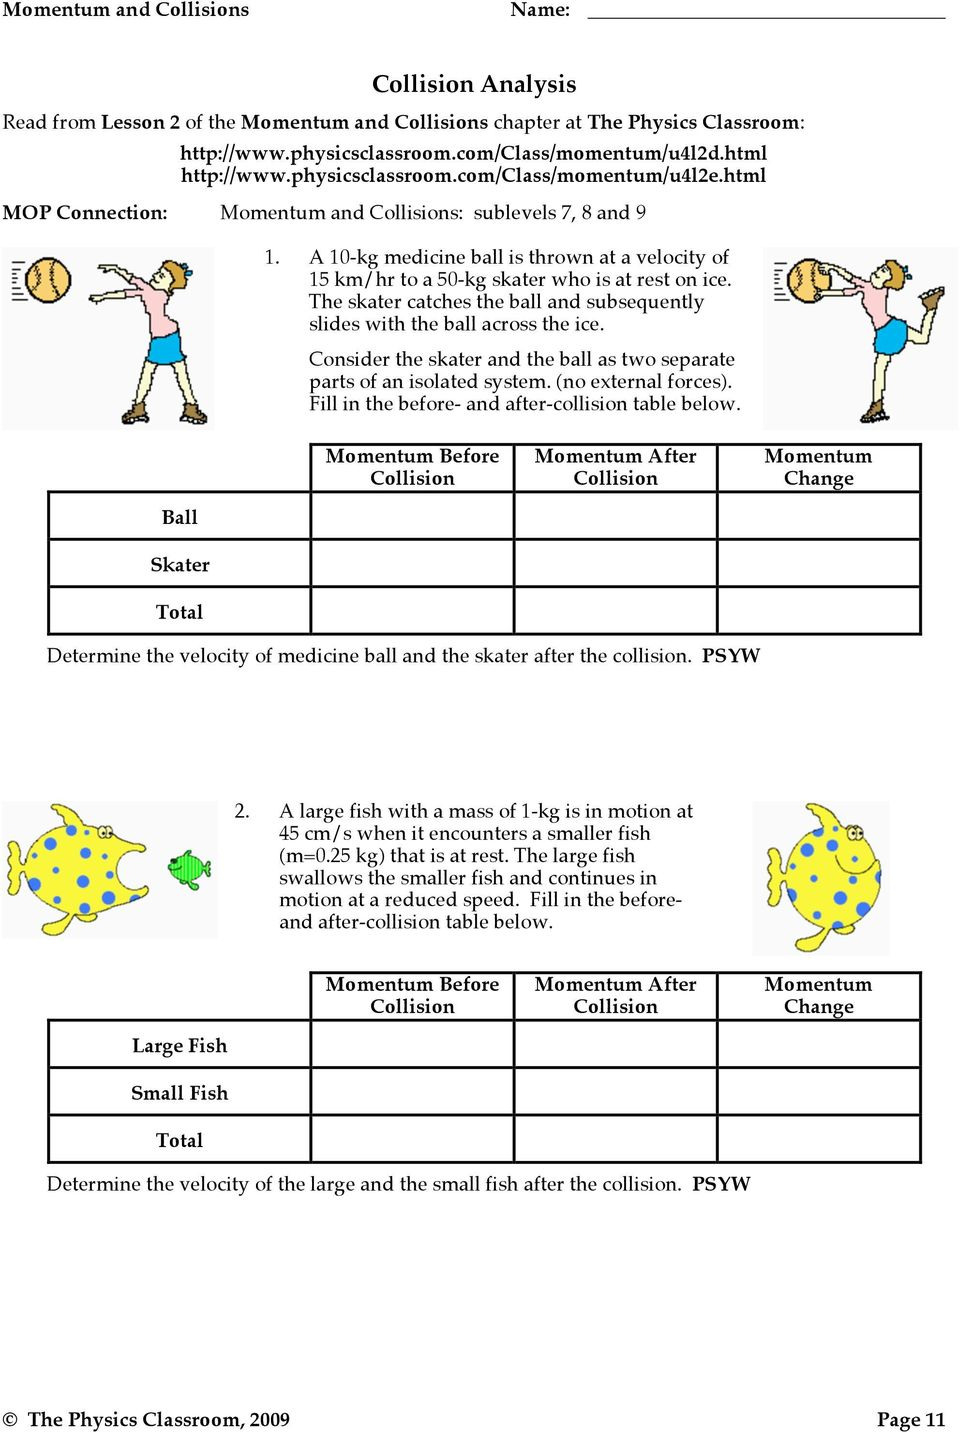 Momentum And Collisions Worksheet Answers Physics Classroom — db-excel.com